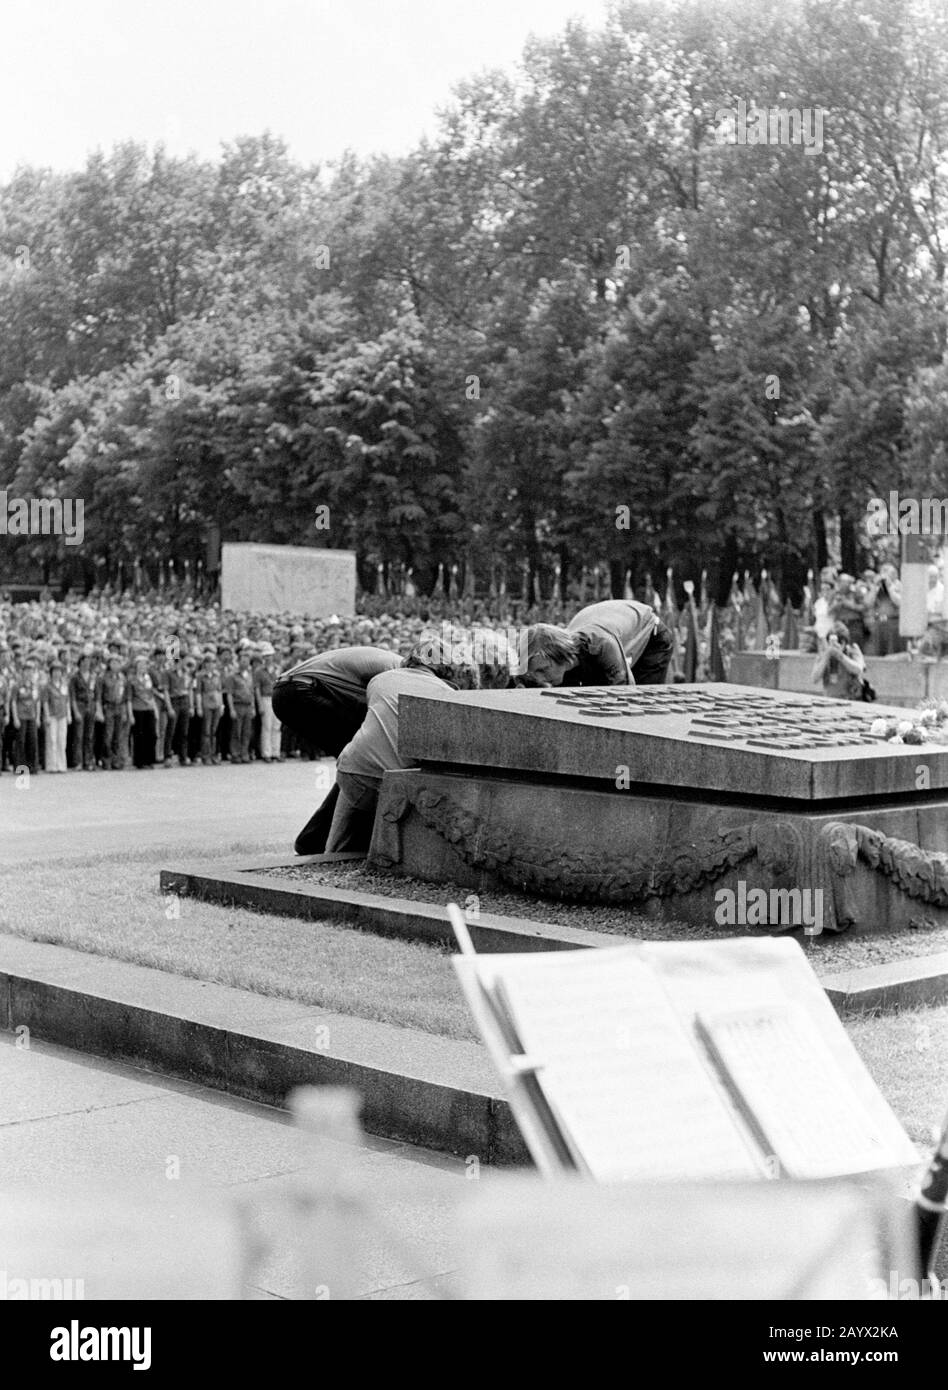 01 January 1979, Brandenburg, Berlin: Laying of a wreath - At the Soviet memorial in Treptower Park, honorary banners of the FDJ are handed over. In 1979, young people and students from the entire GDR gathered in East Berlin for the Pentecost Meeting of Youth. Exact date of recording not known. Photo: Volkmar Heinz/dpa-Zentralbild/ZB Stock Photo